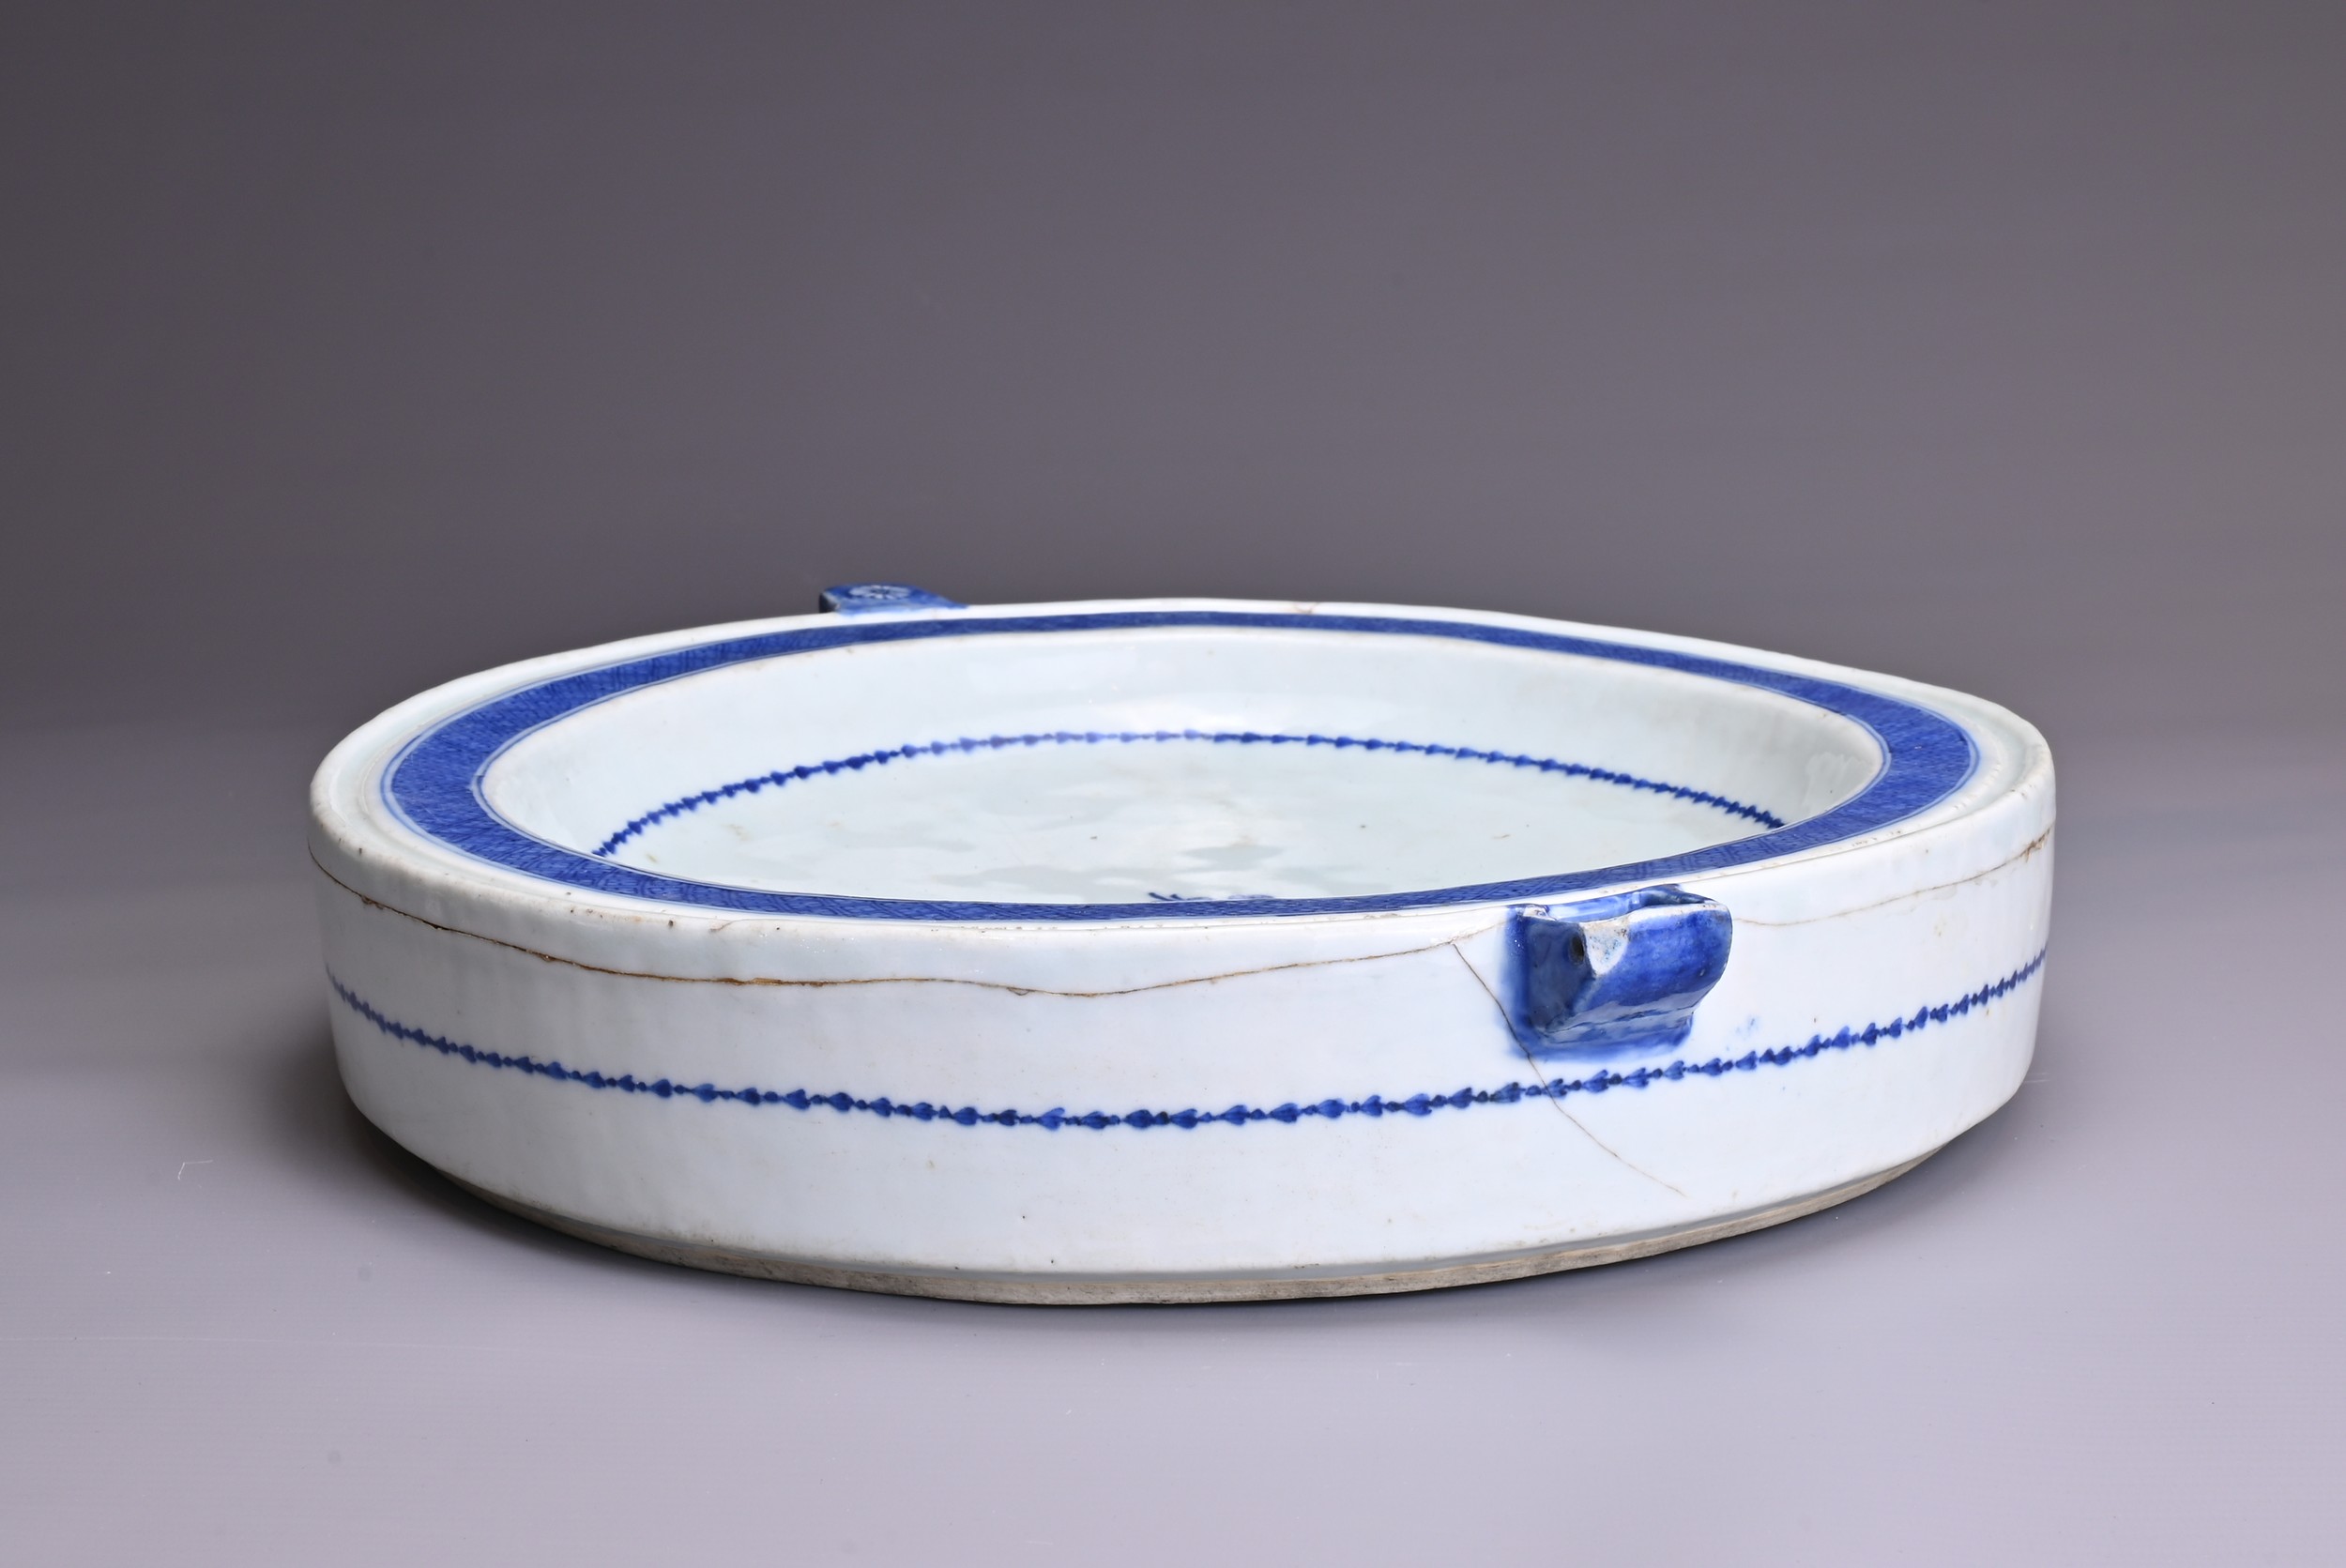 A LARGE CHINESE BLUE AND WHITE PORCELAIN WARMING DISH, 18TH CENTURY. Minimally decorated with - Image 5 of 6